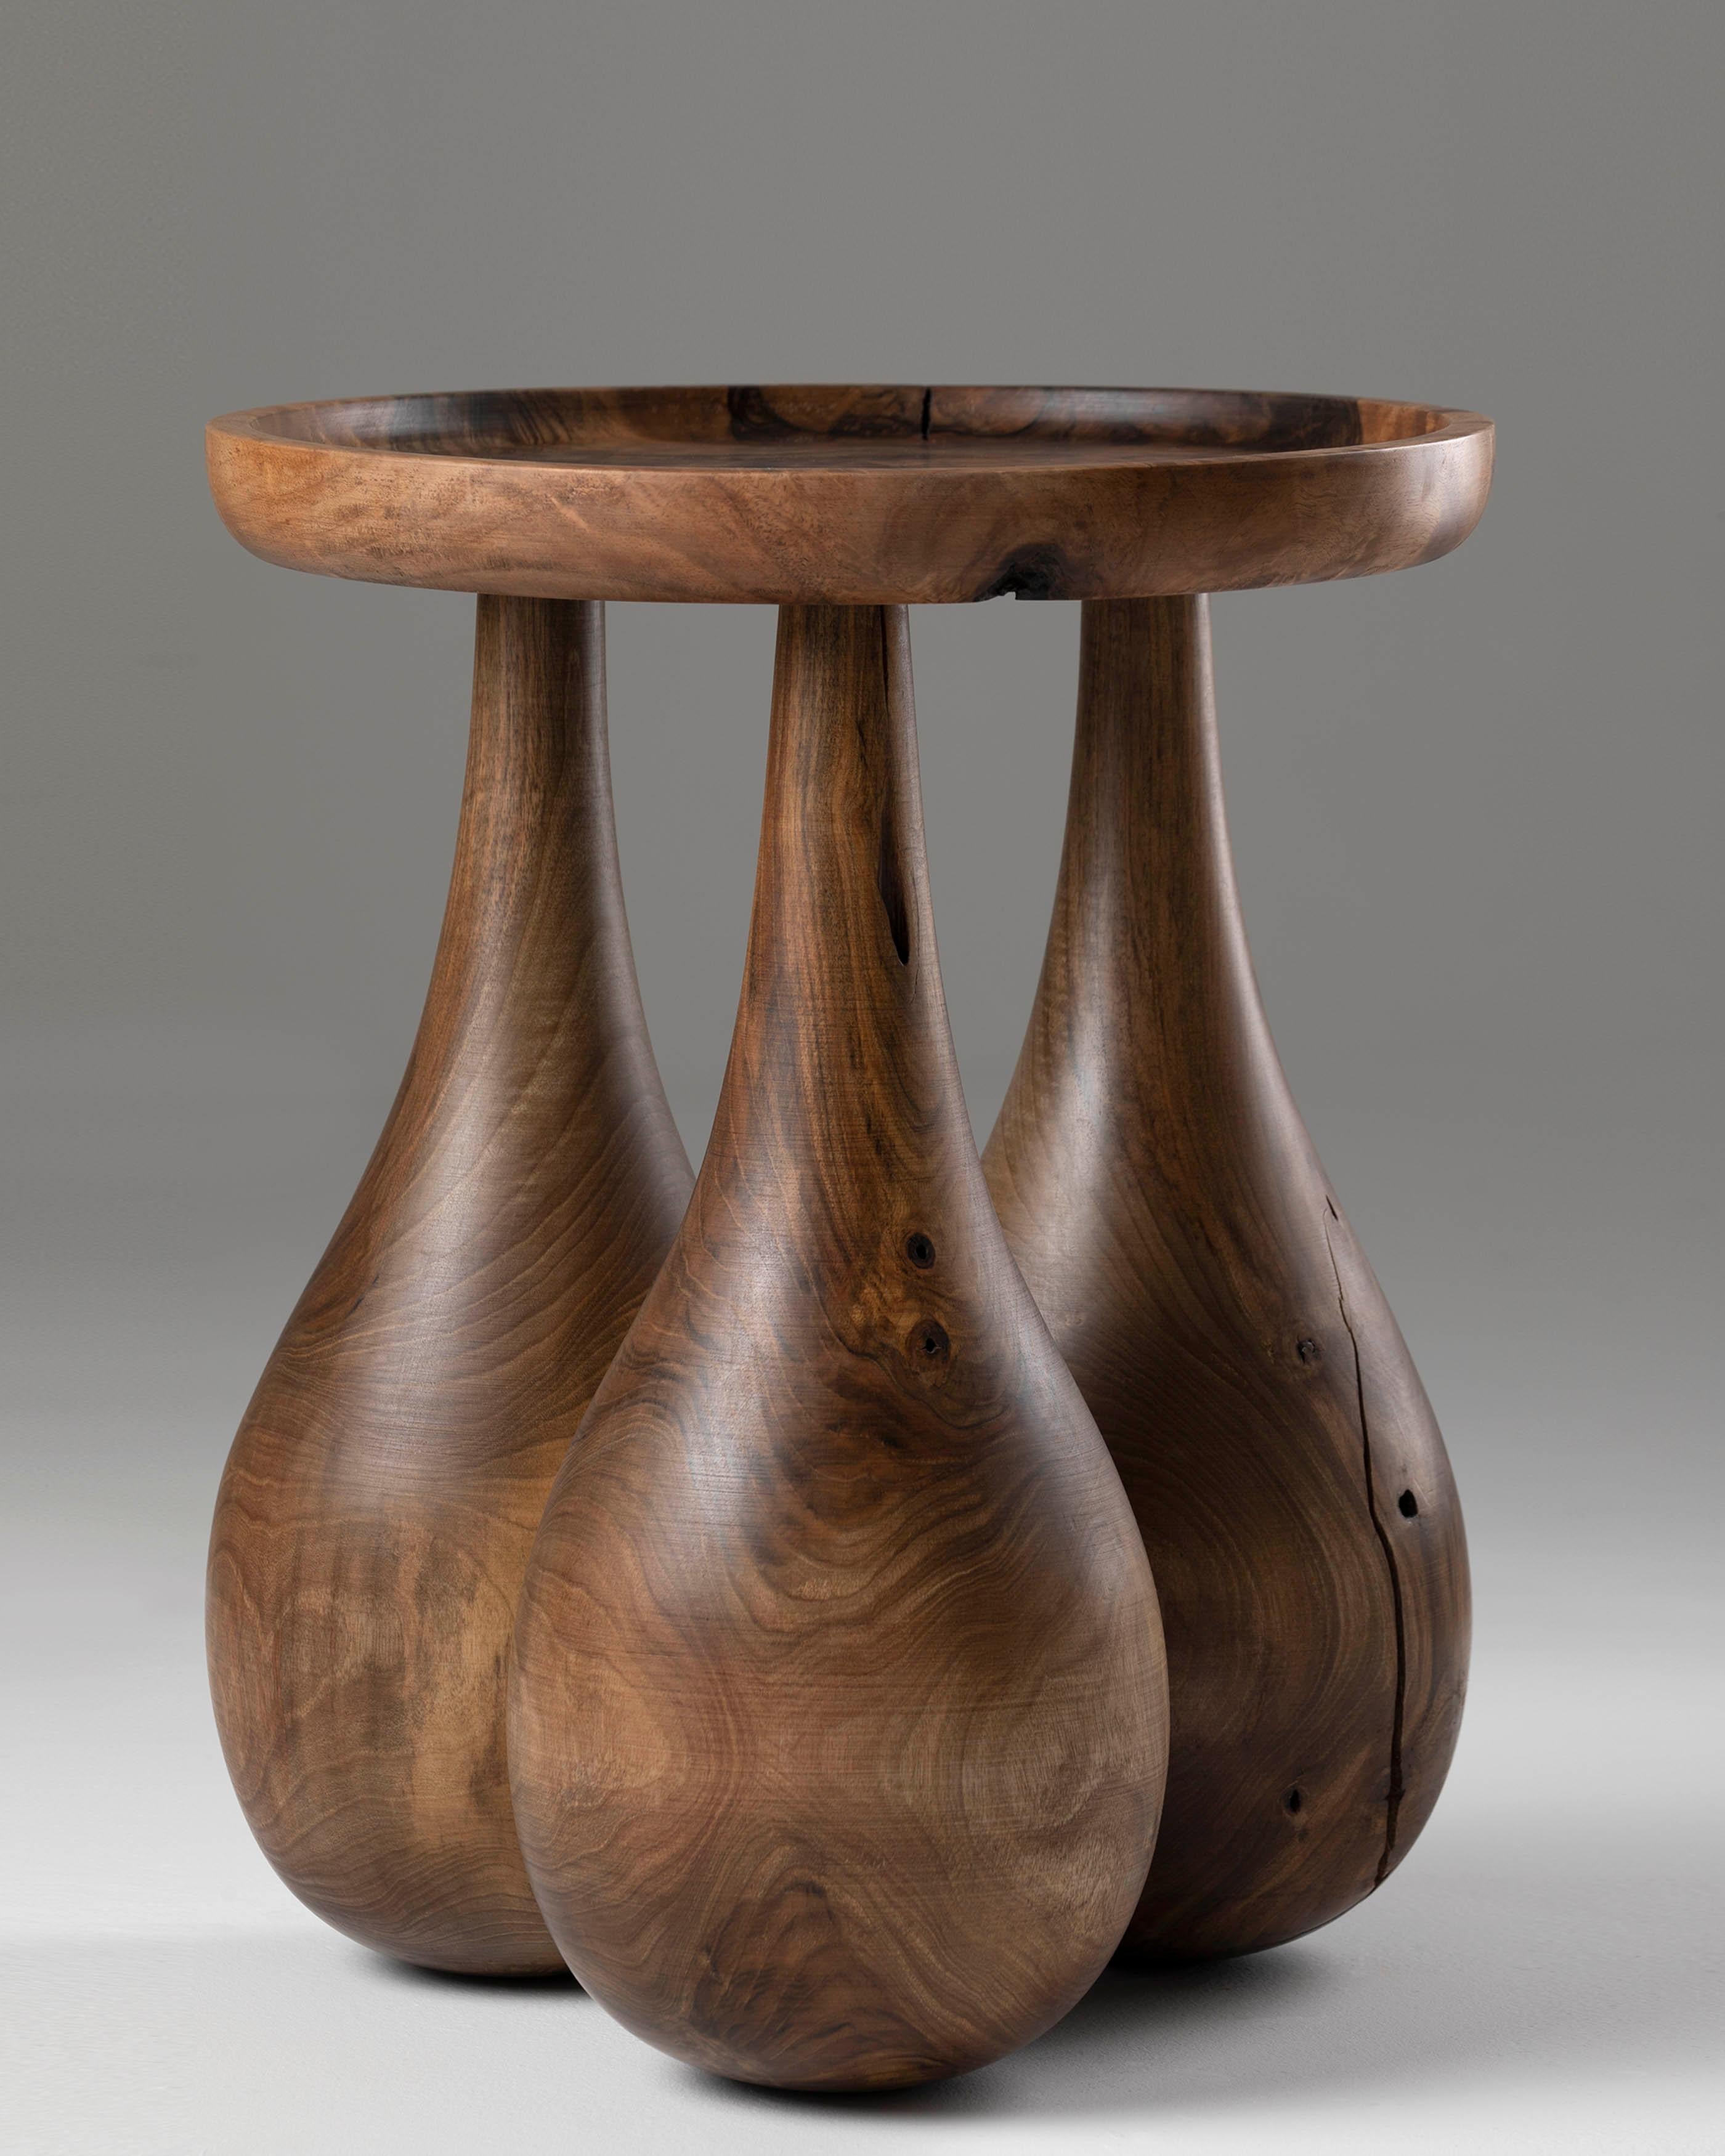 Drop Side Table by Nana Zaalishvili
Dimensions: Ø 40 x H 50 cm.
Materials: Solid walnut.

Created and handcrafted in Tbilisi using domestic walnut wood, the ‘Drop’ Table combines traditional craftsmanship with the contemporary language of sinuous